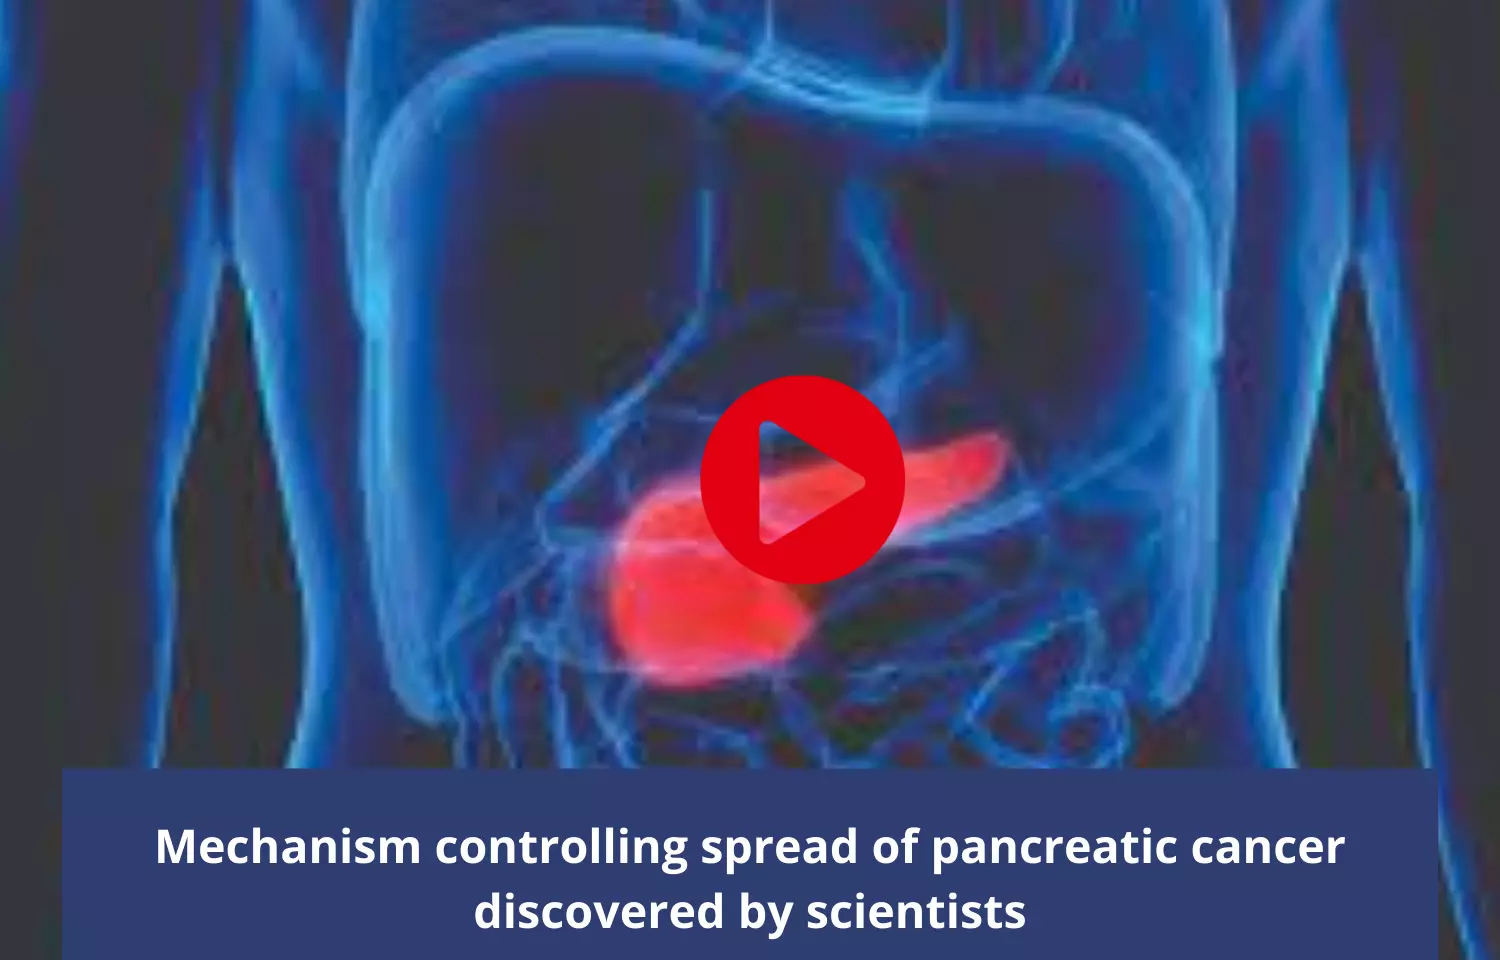 Mechanism controlling spread of pancreatic cancer discovered by scientists